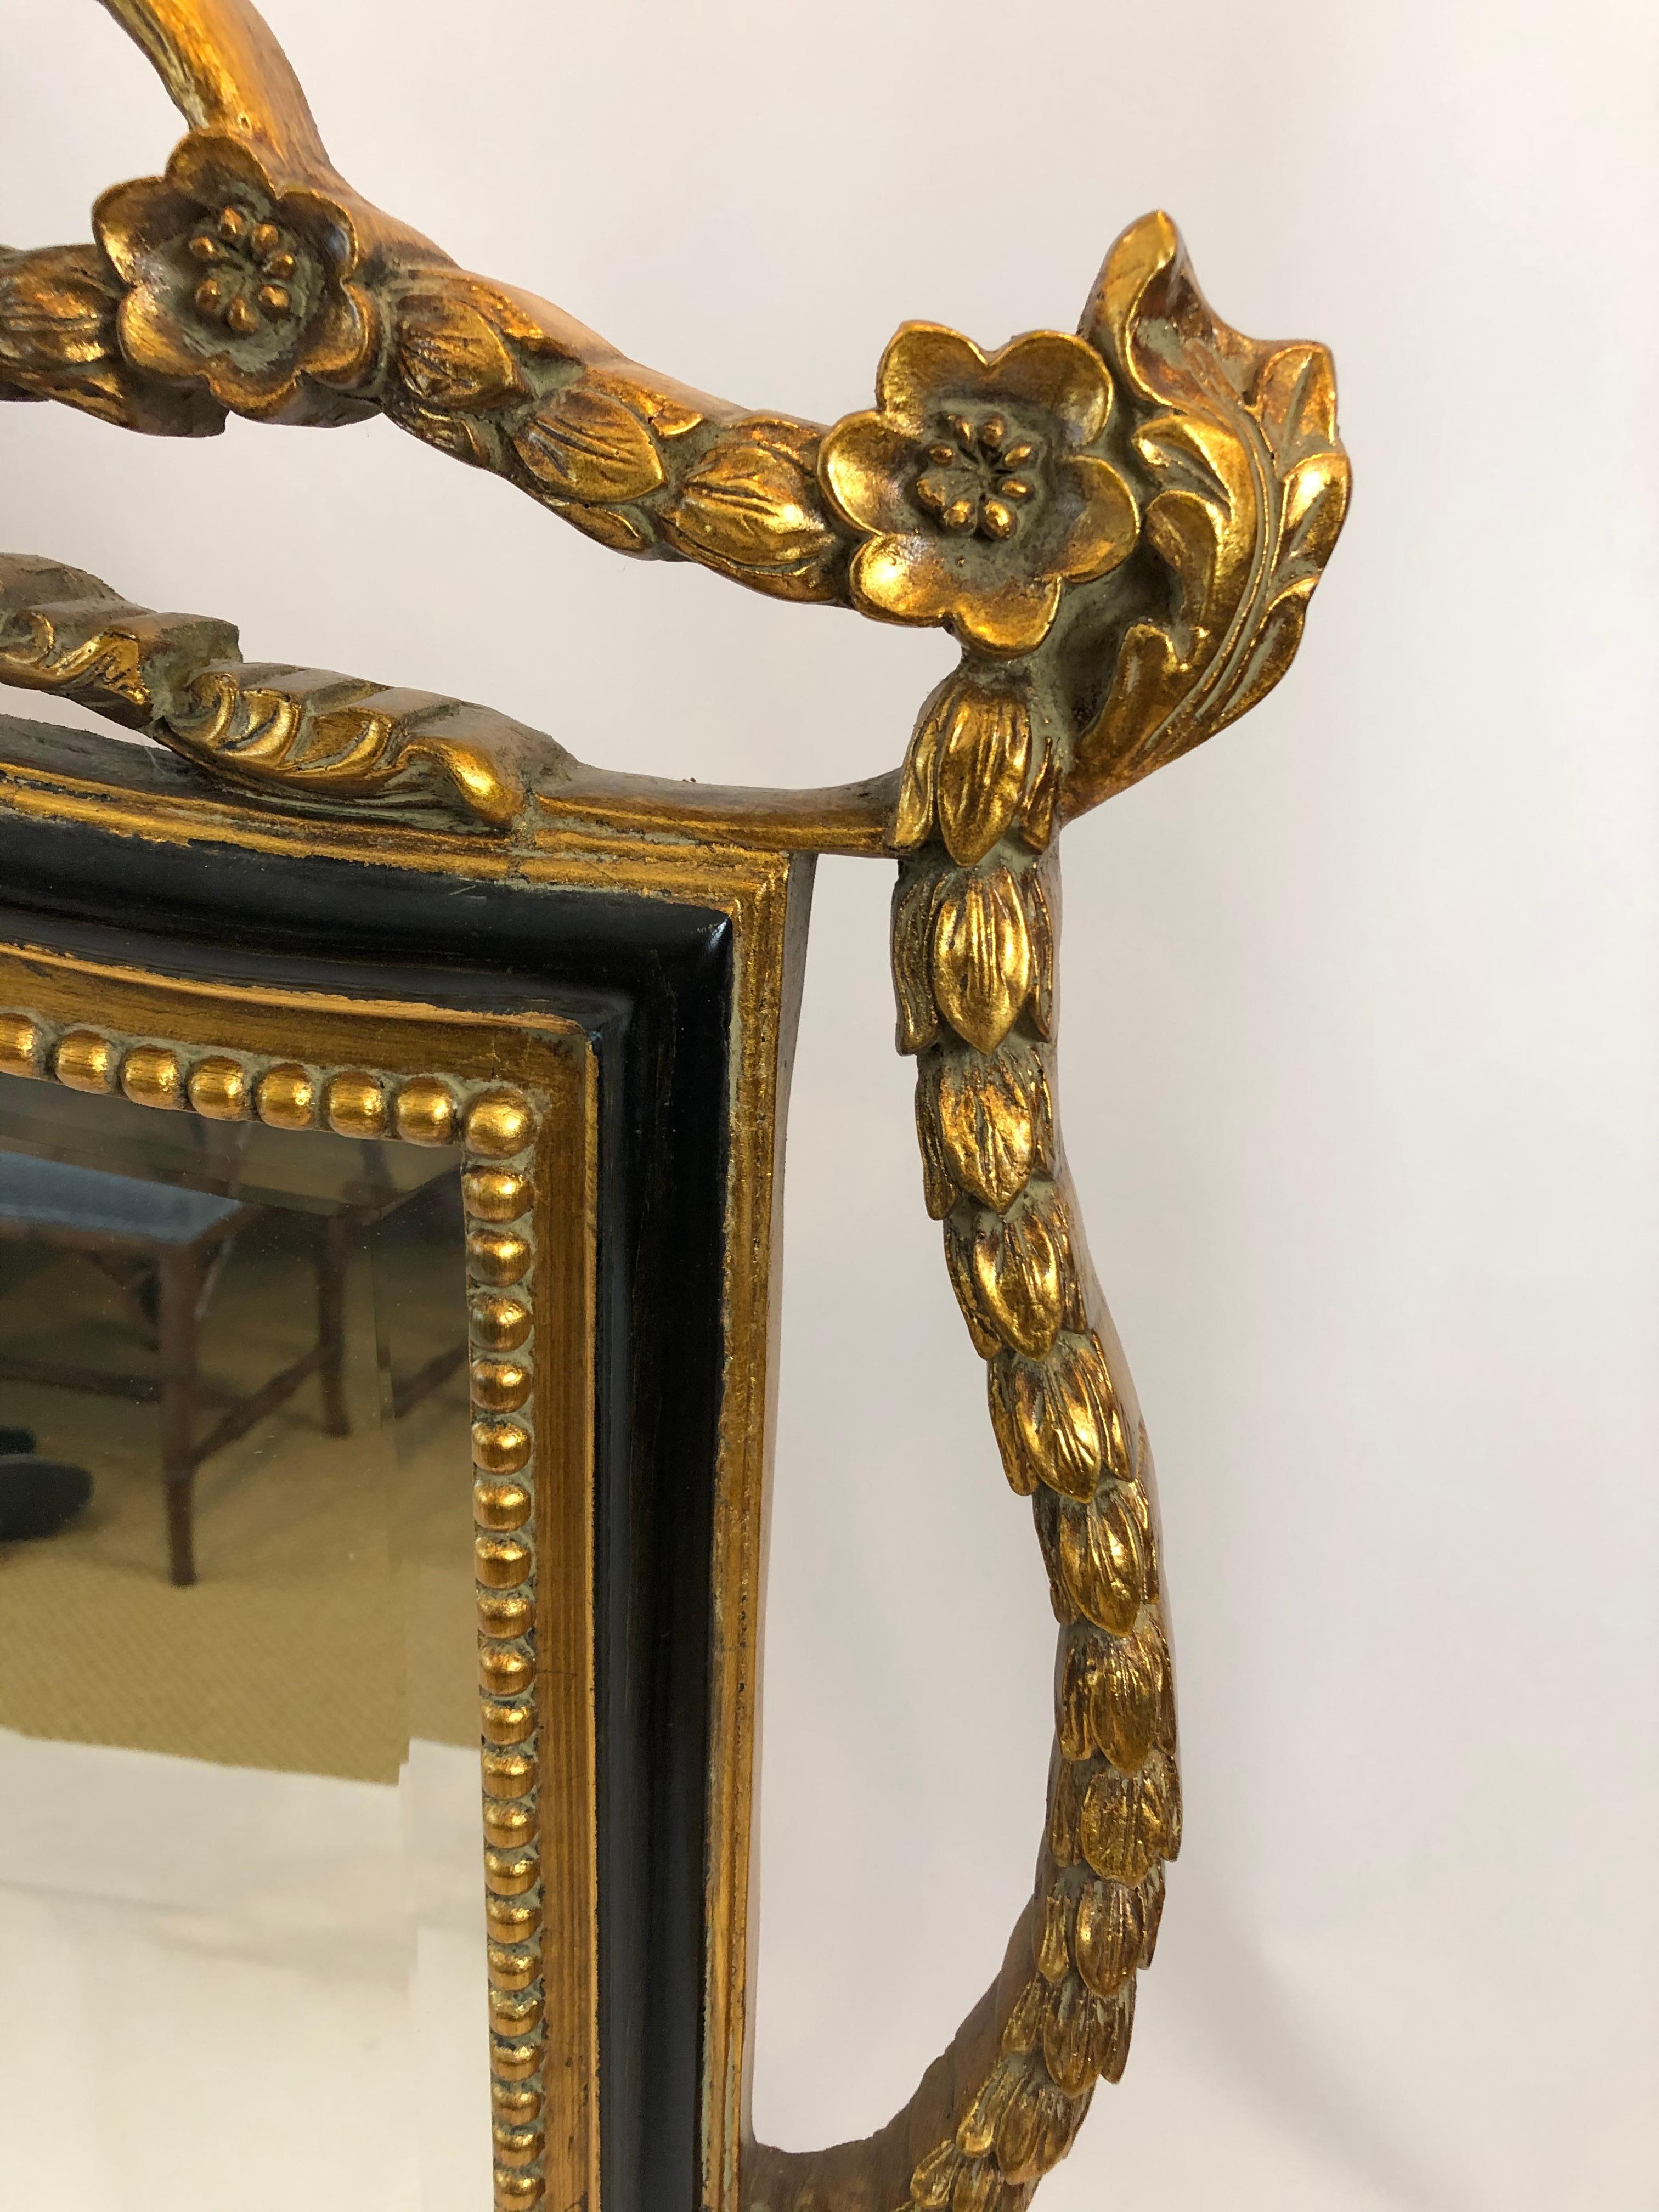 Very large beautiful mantle or buffet mirror in black and gold having lovely curlicues on top with flowers and beading around the frame.